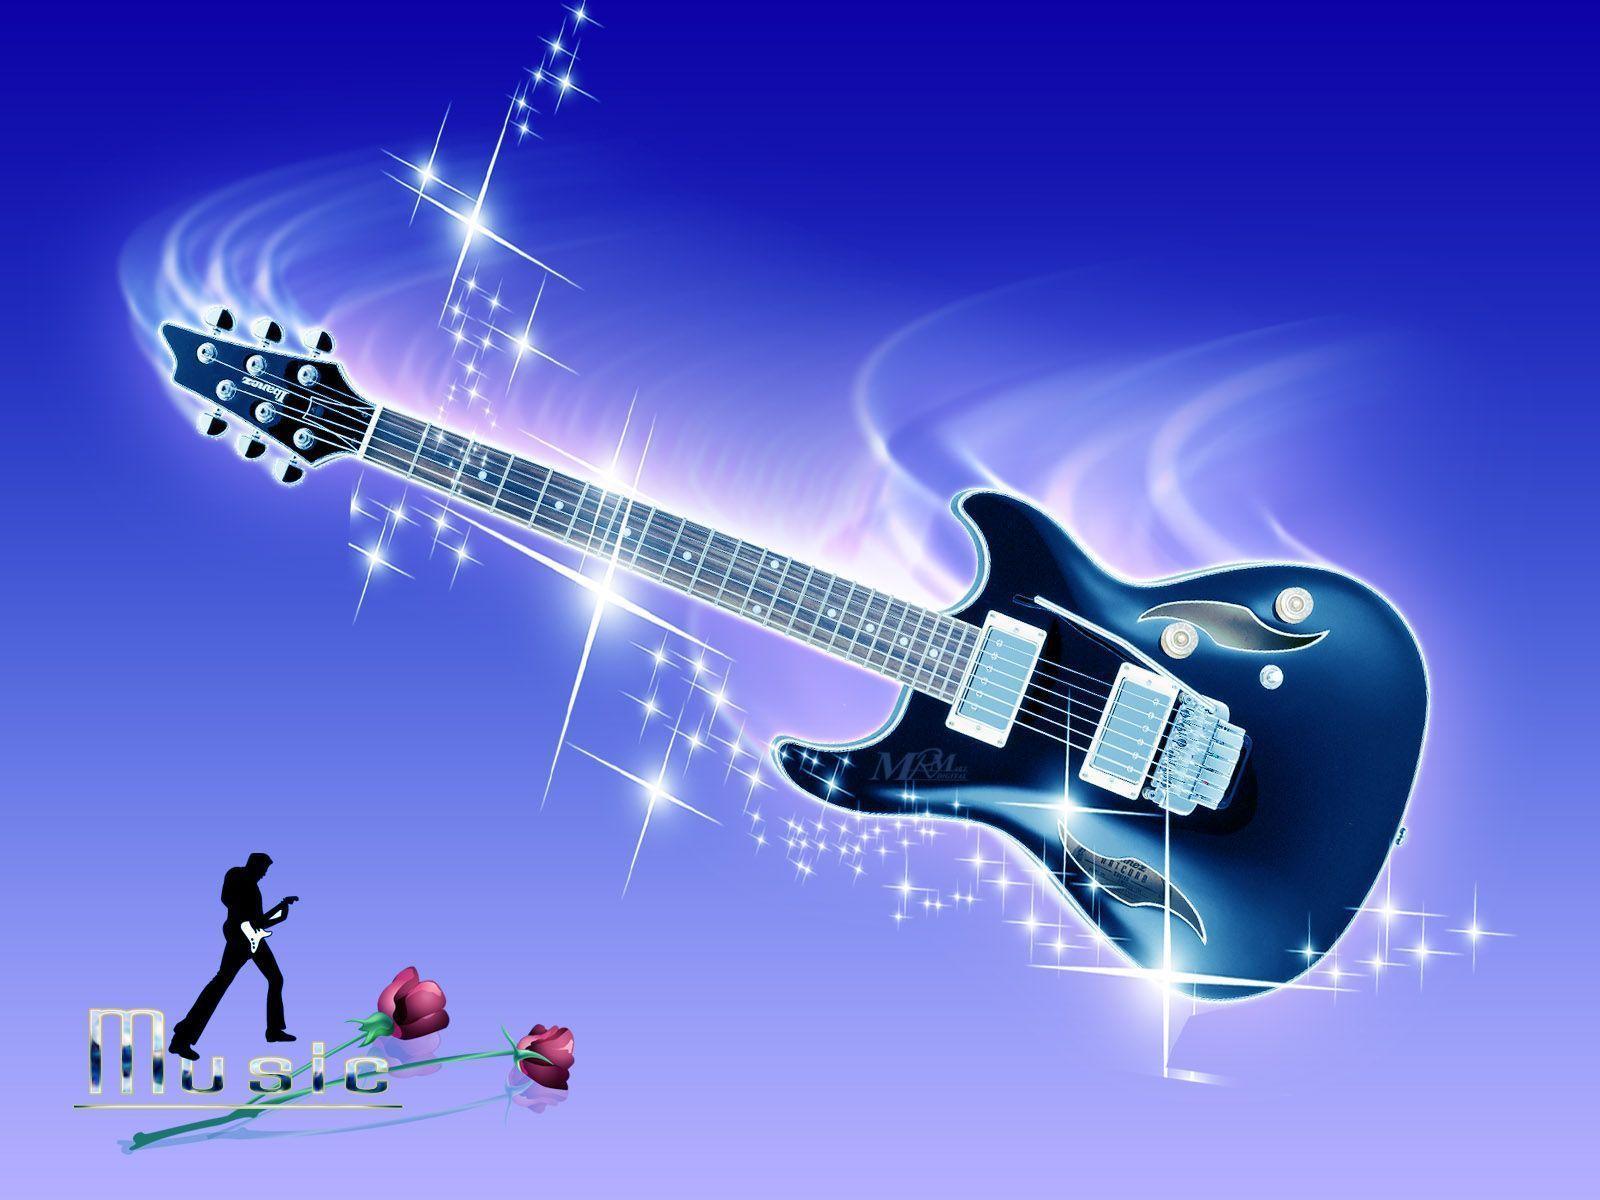 Crazy Music 3D Wallpaper Android Application